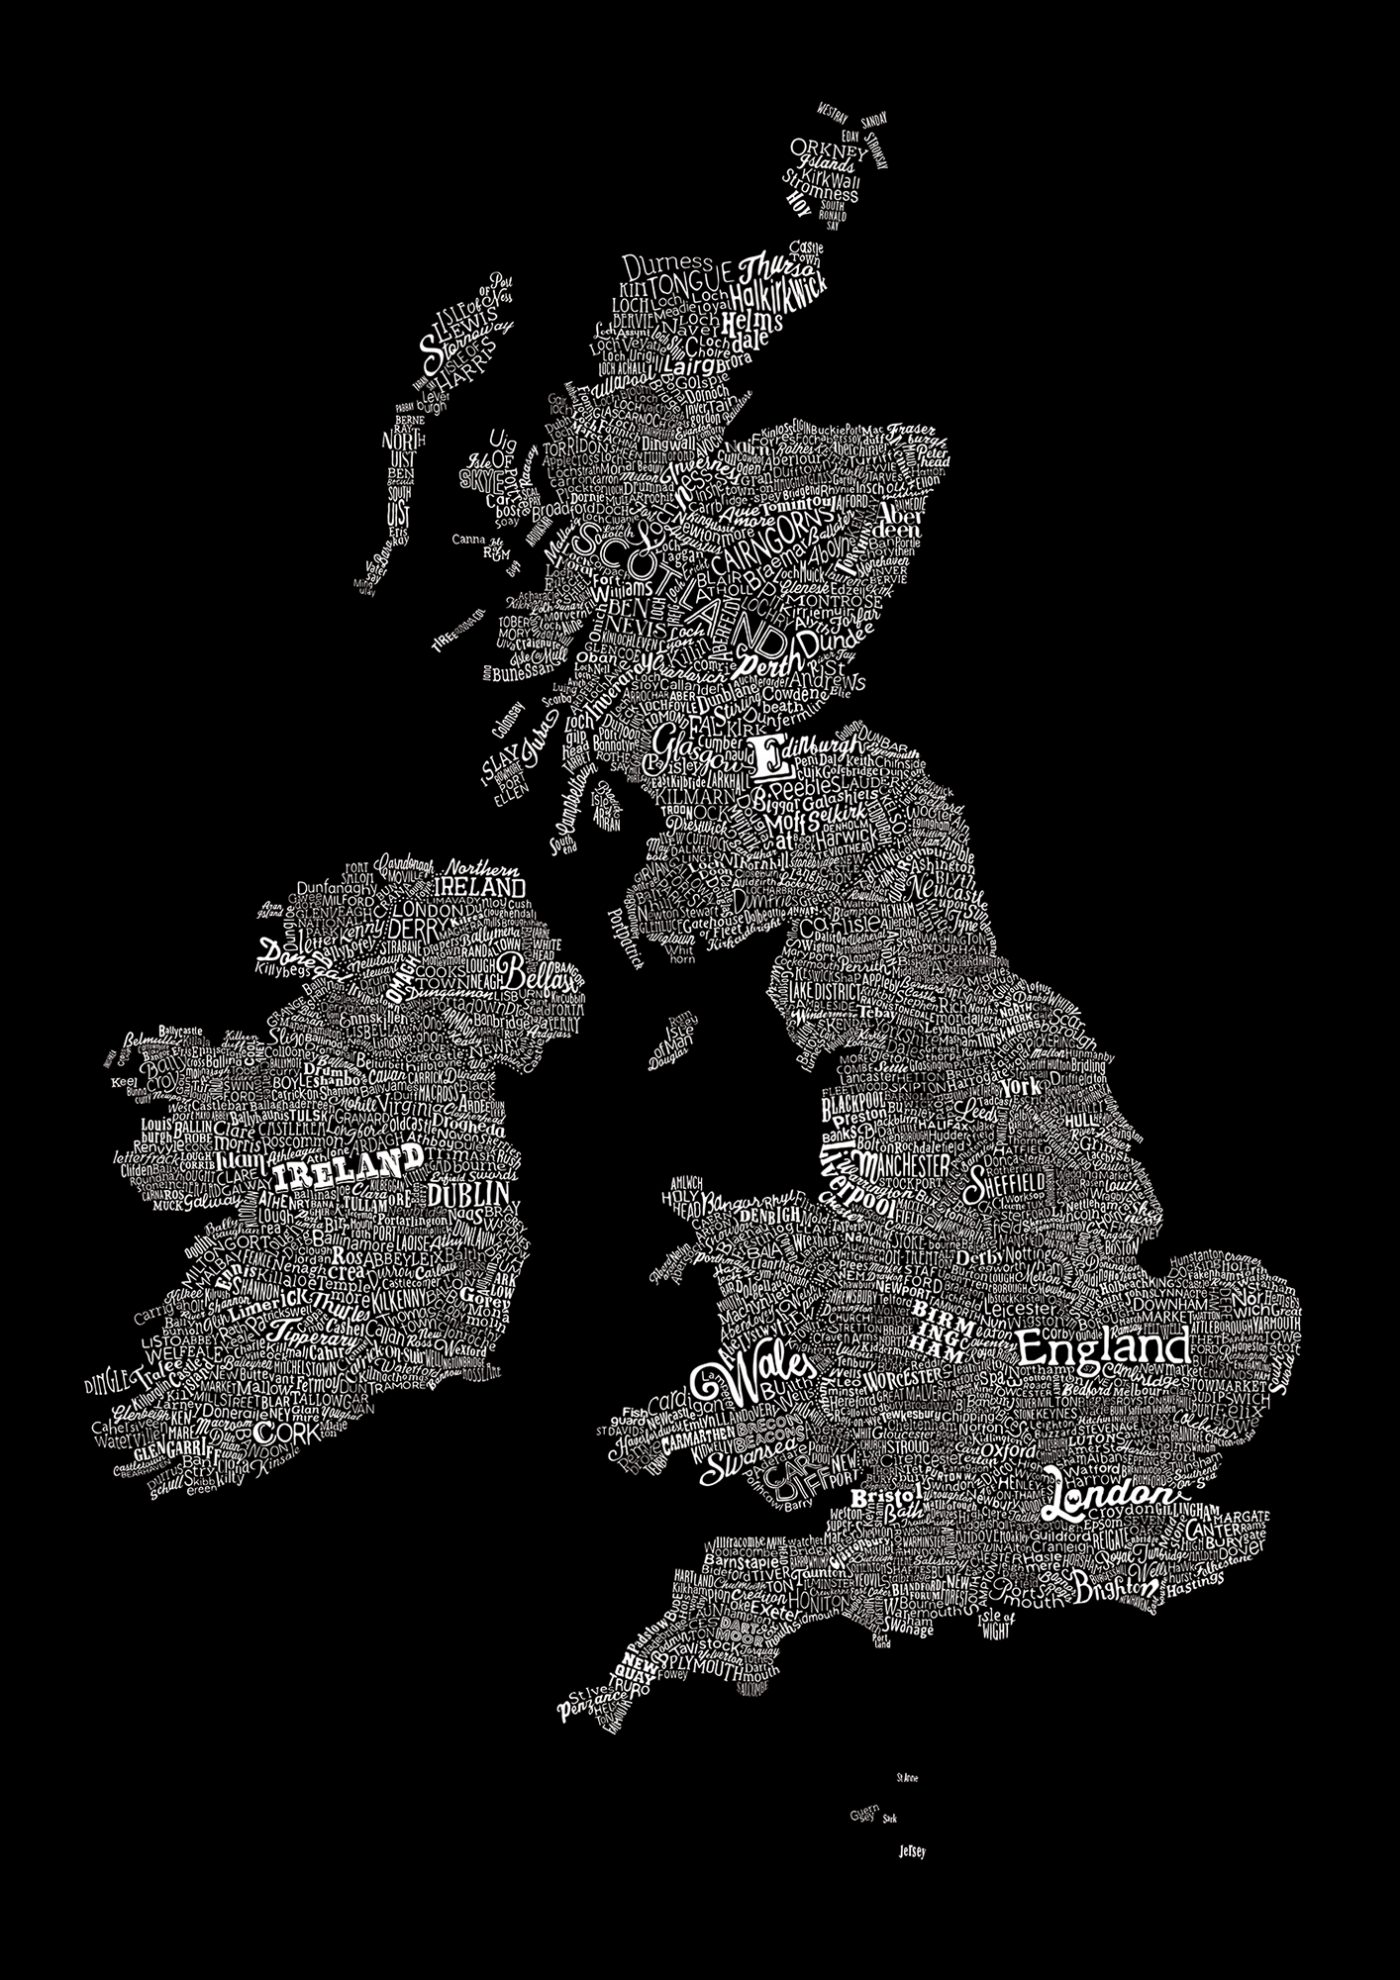 A typographic map of britain